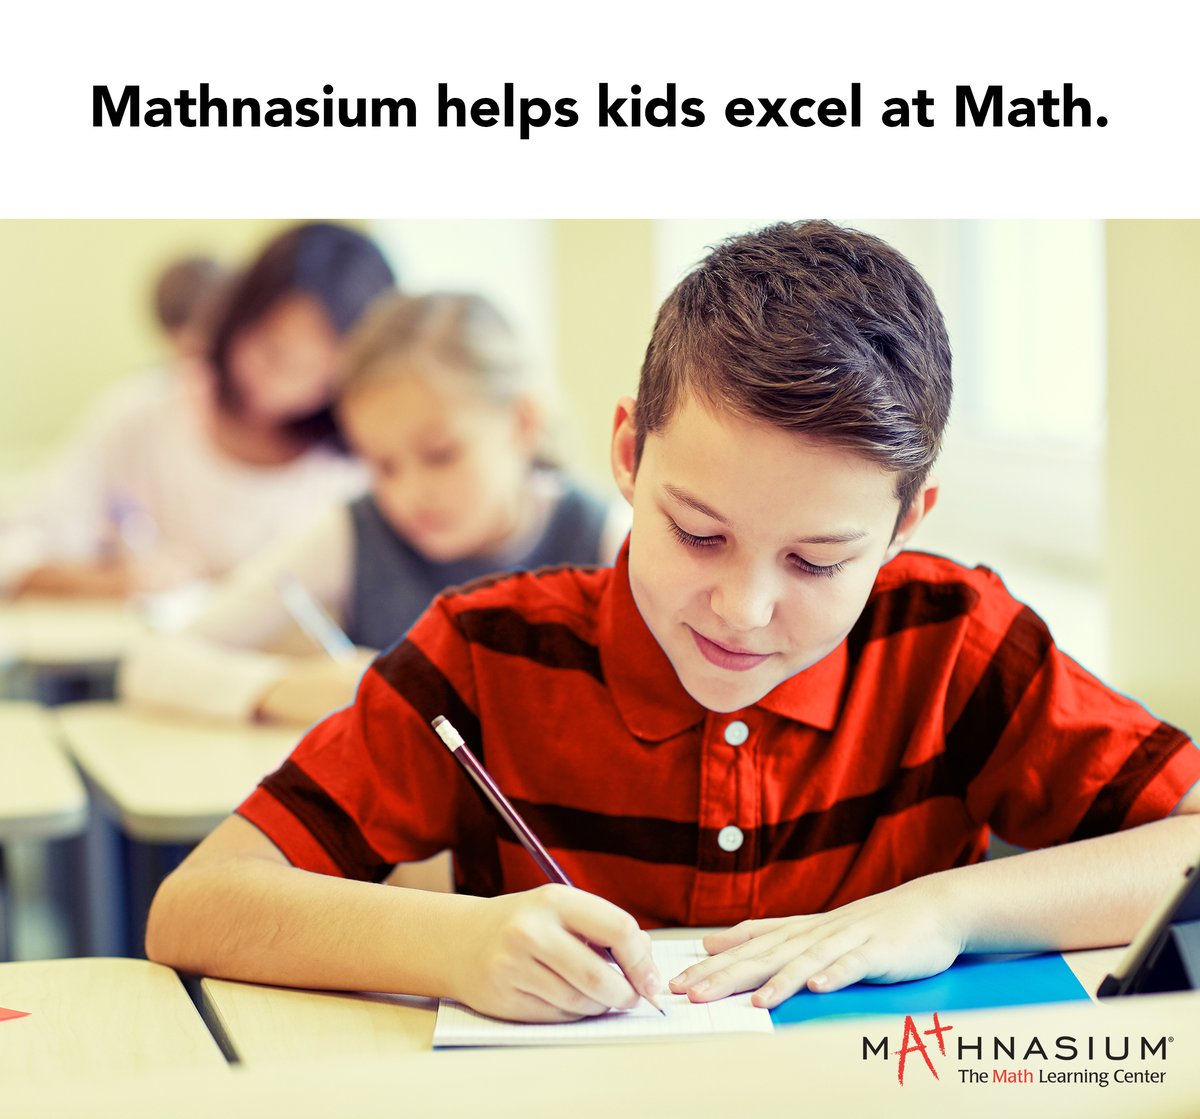 Mathnasium of Washington Township helps kids learn to love math. ❤ 🙋 😁 Could your student use a helping hand? ✍ 😉 mathnasium.com/math-centers/w… #mathnasium #mathtutor #mathtest #mathgrade #mathhelp #mathclass